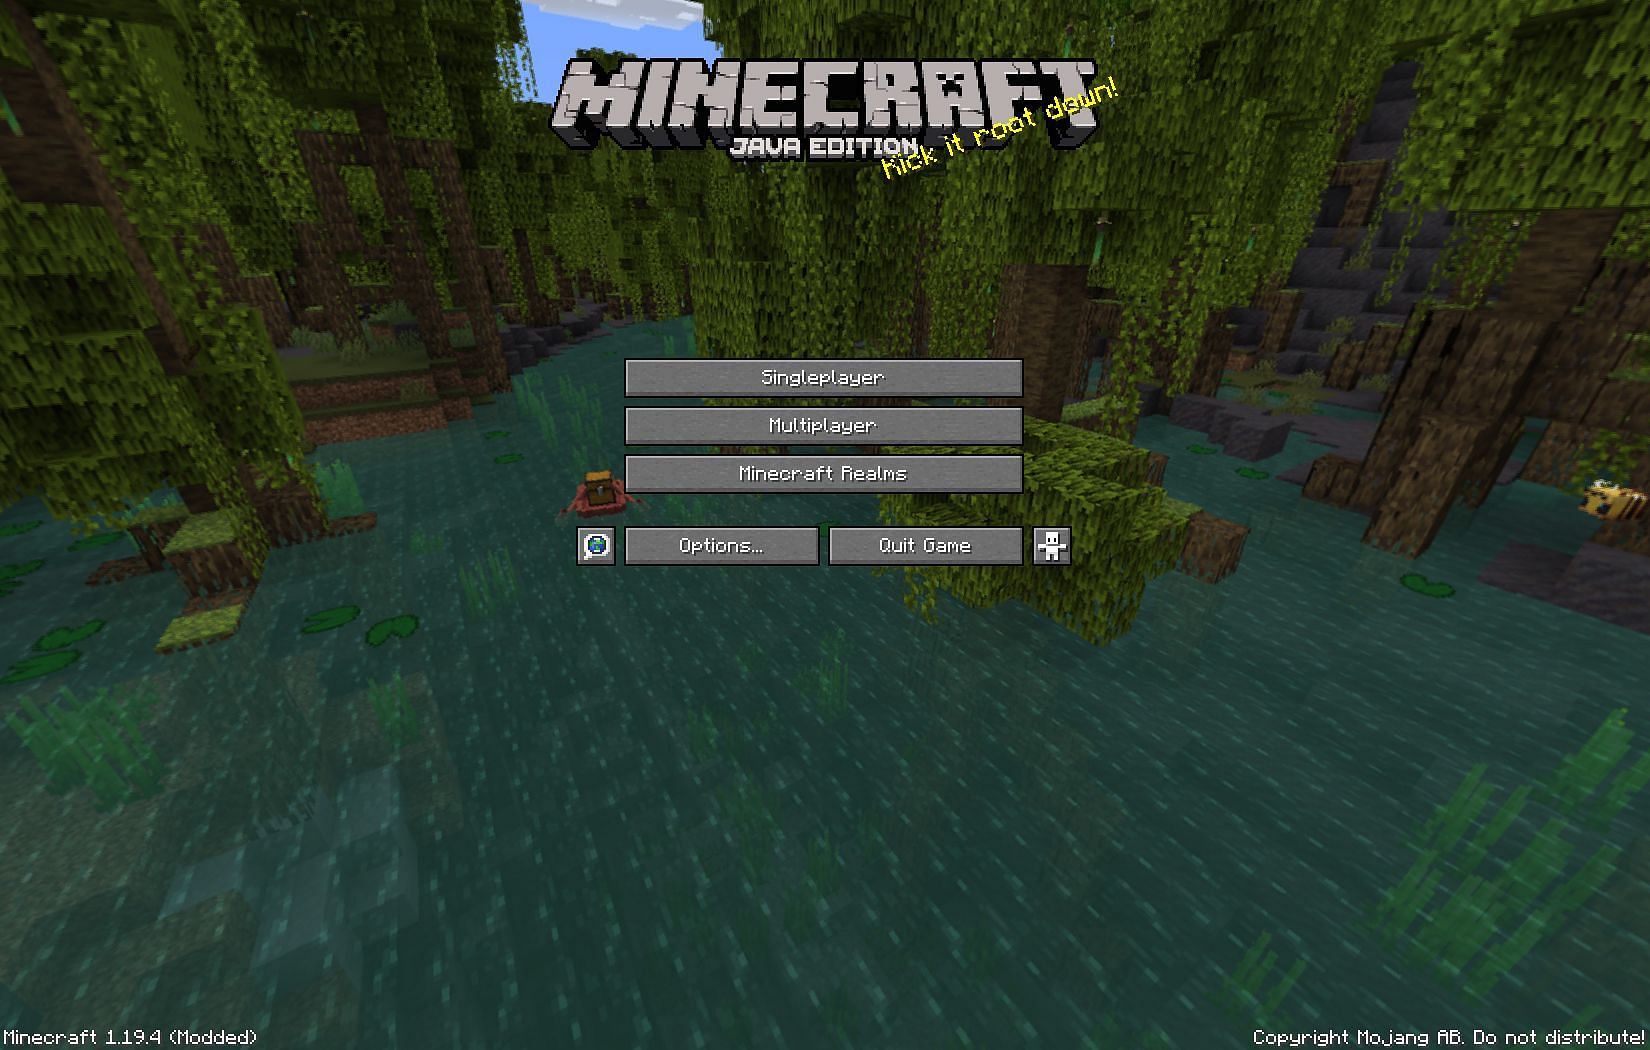 How to play Minecraft on your PC